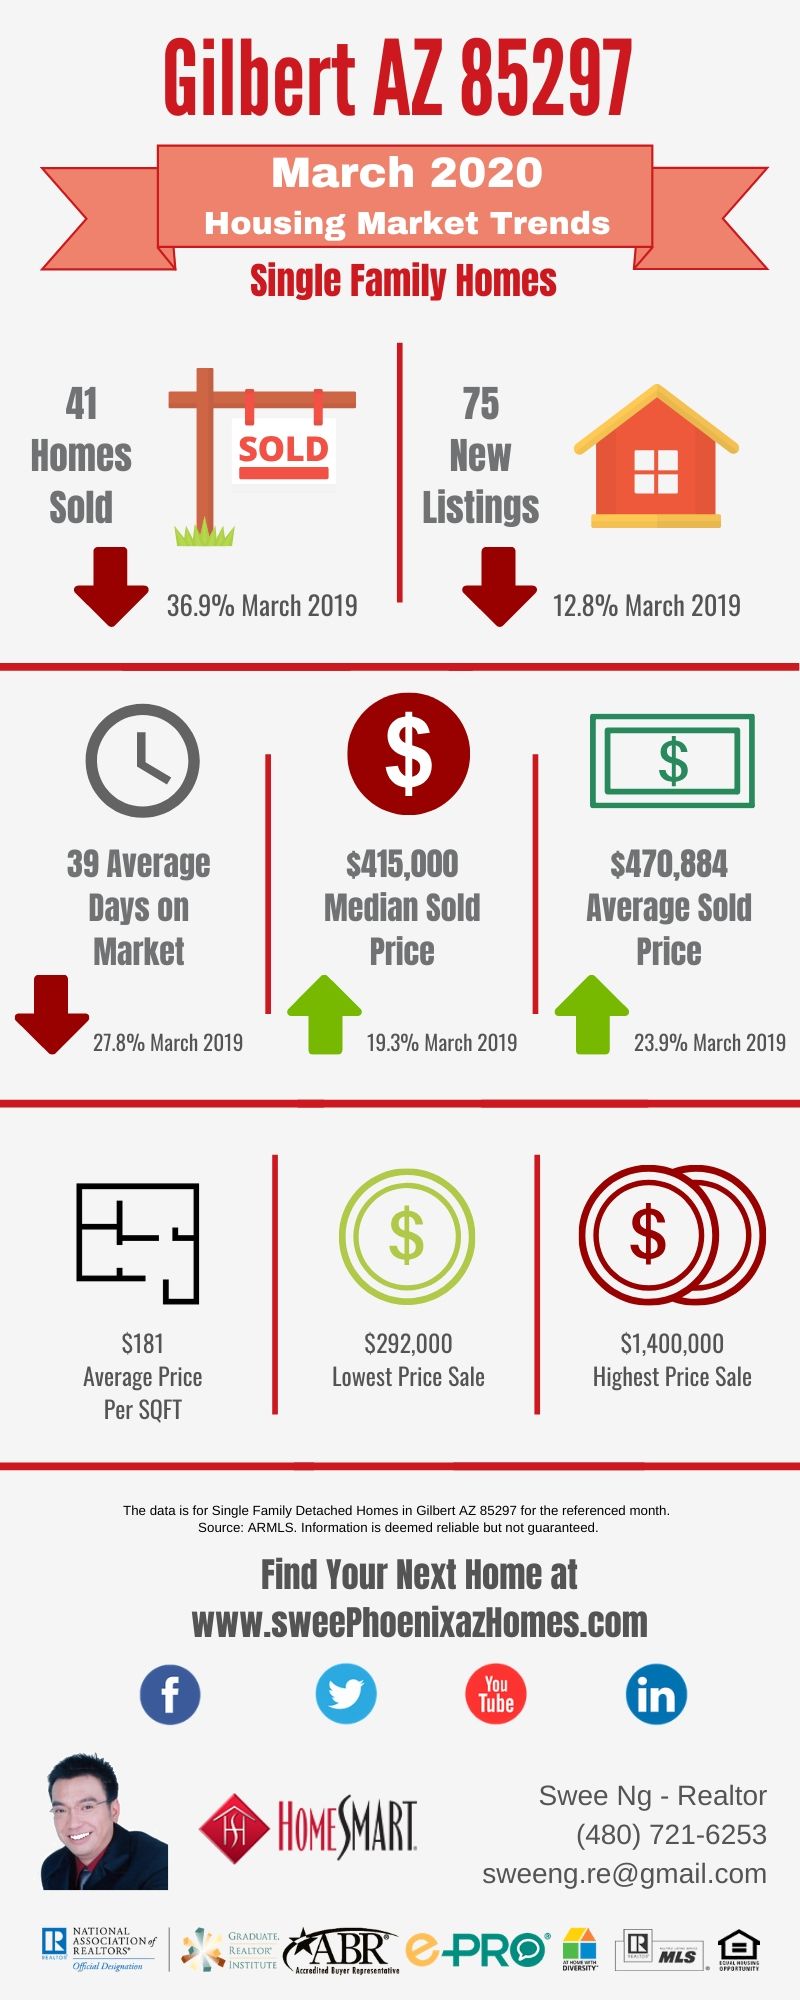 Gilbert AZ 85297 Housing Market Trends Report March 2020 by Swee Ng, Real Estate and House Value